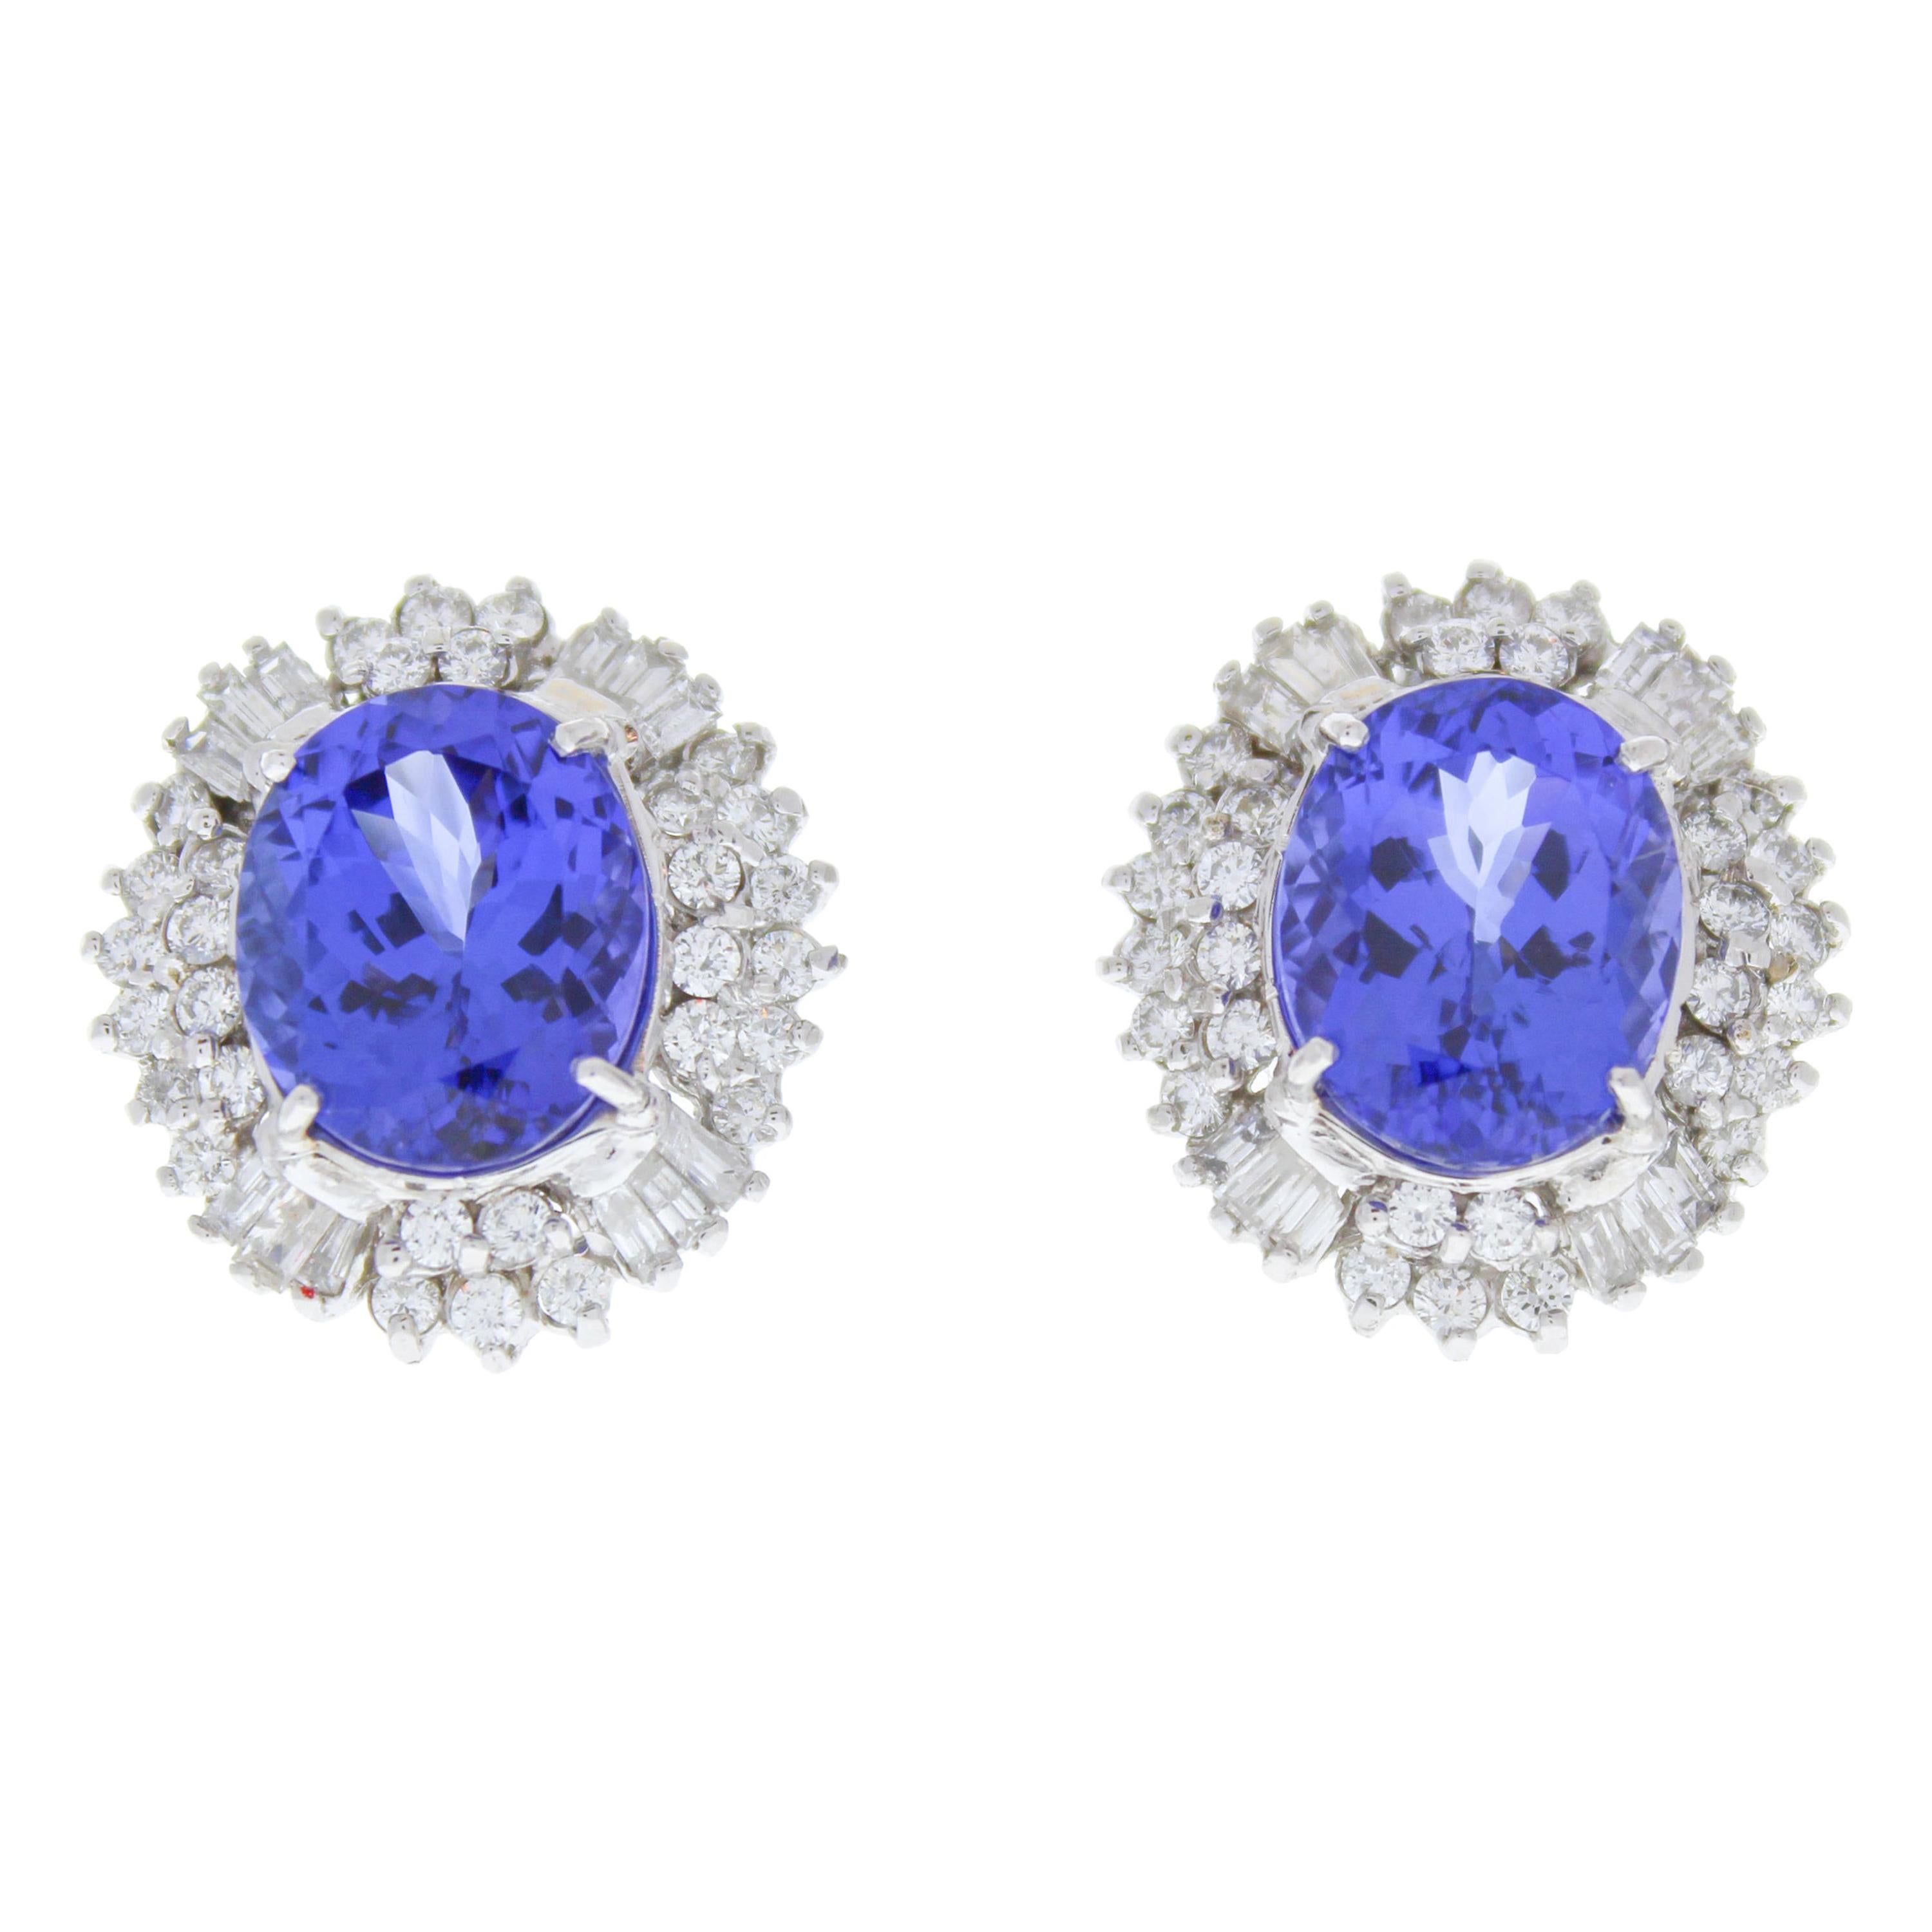 15.46 Carat Total Oval Tanzanite & Diamond Stud Earring in 18K White Gold For Sale